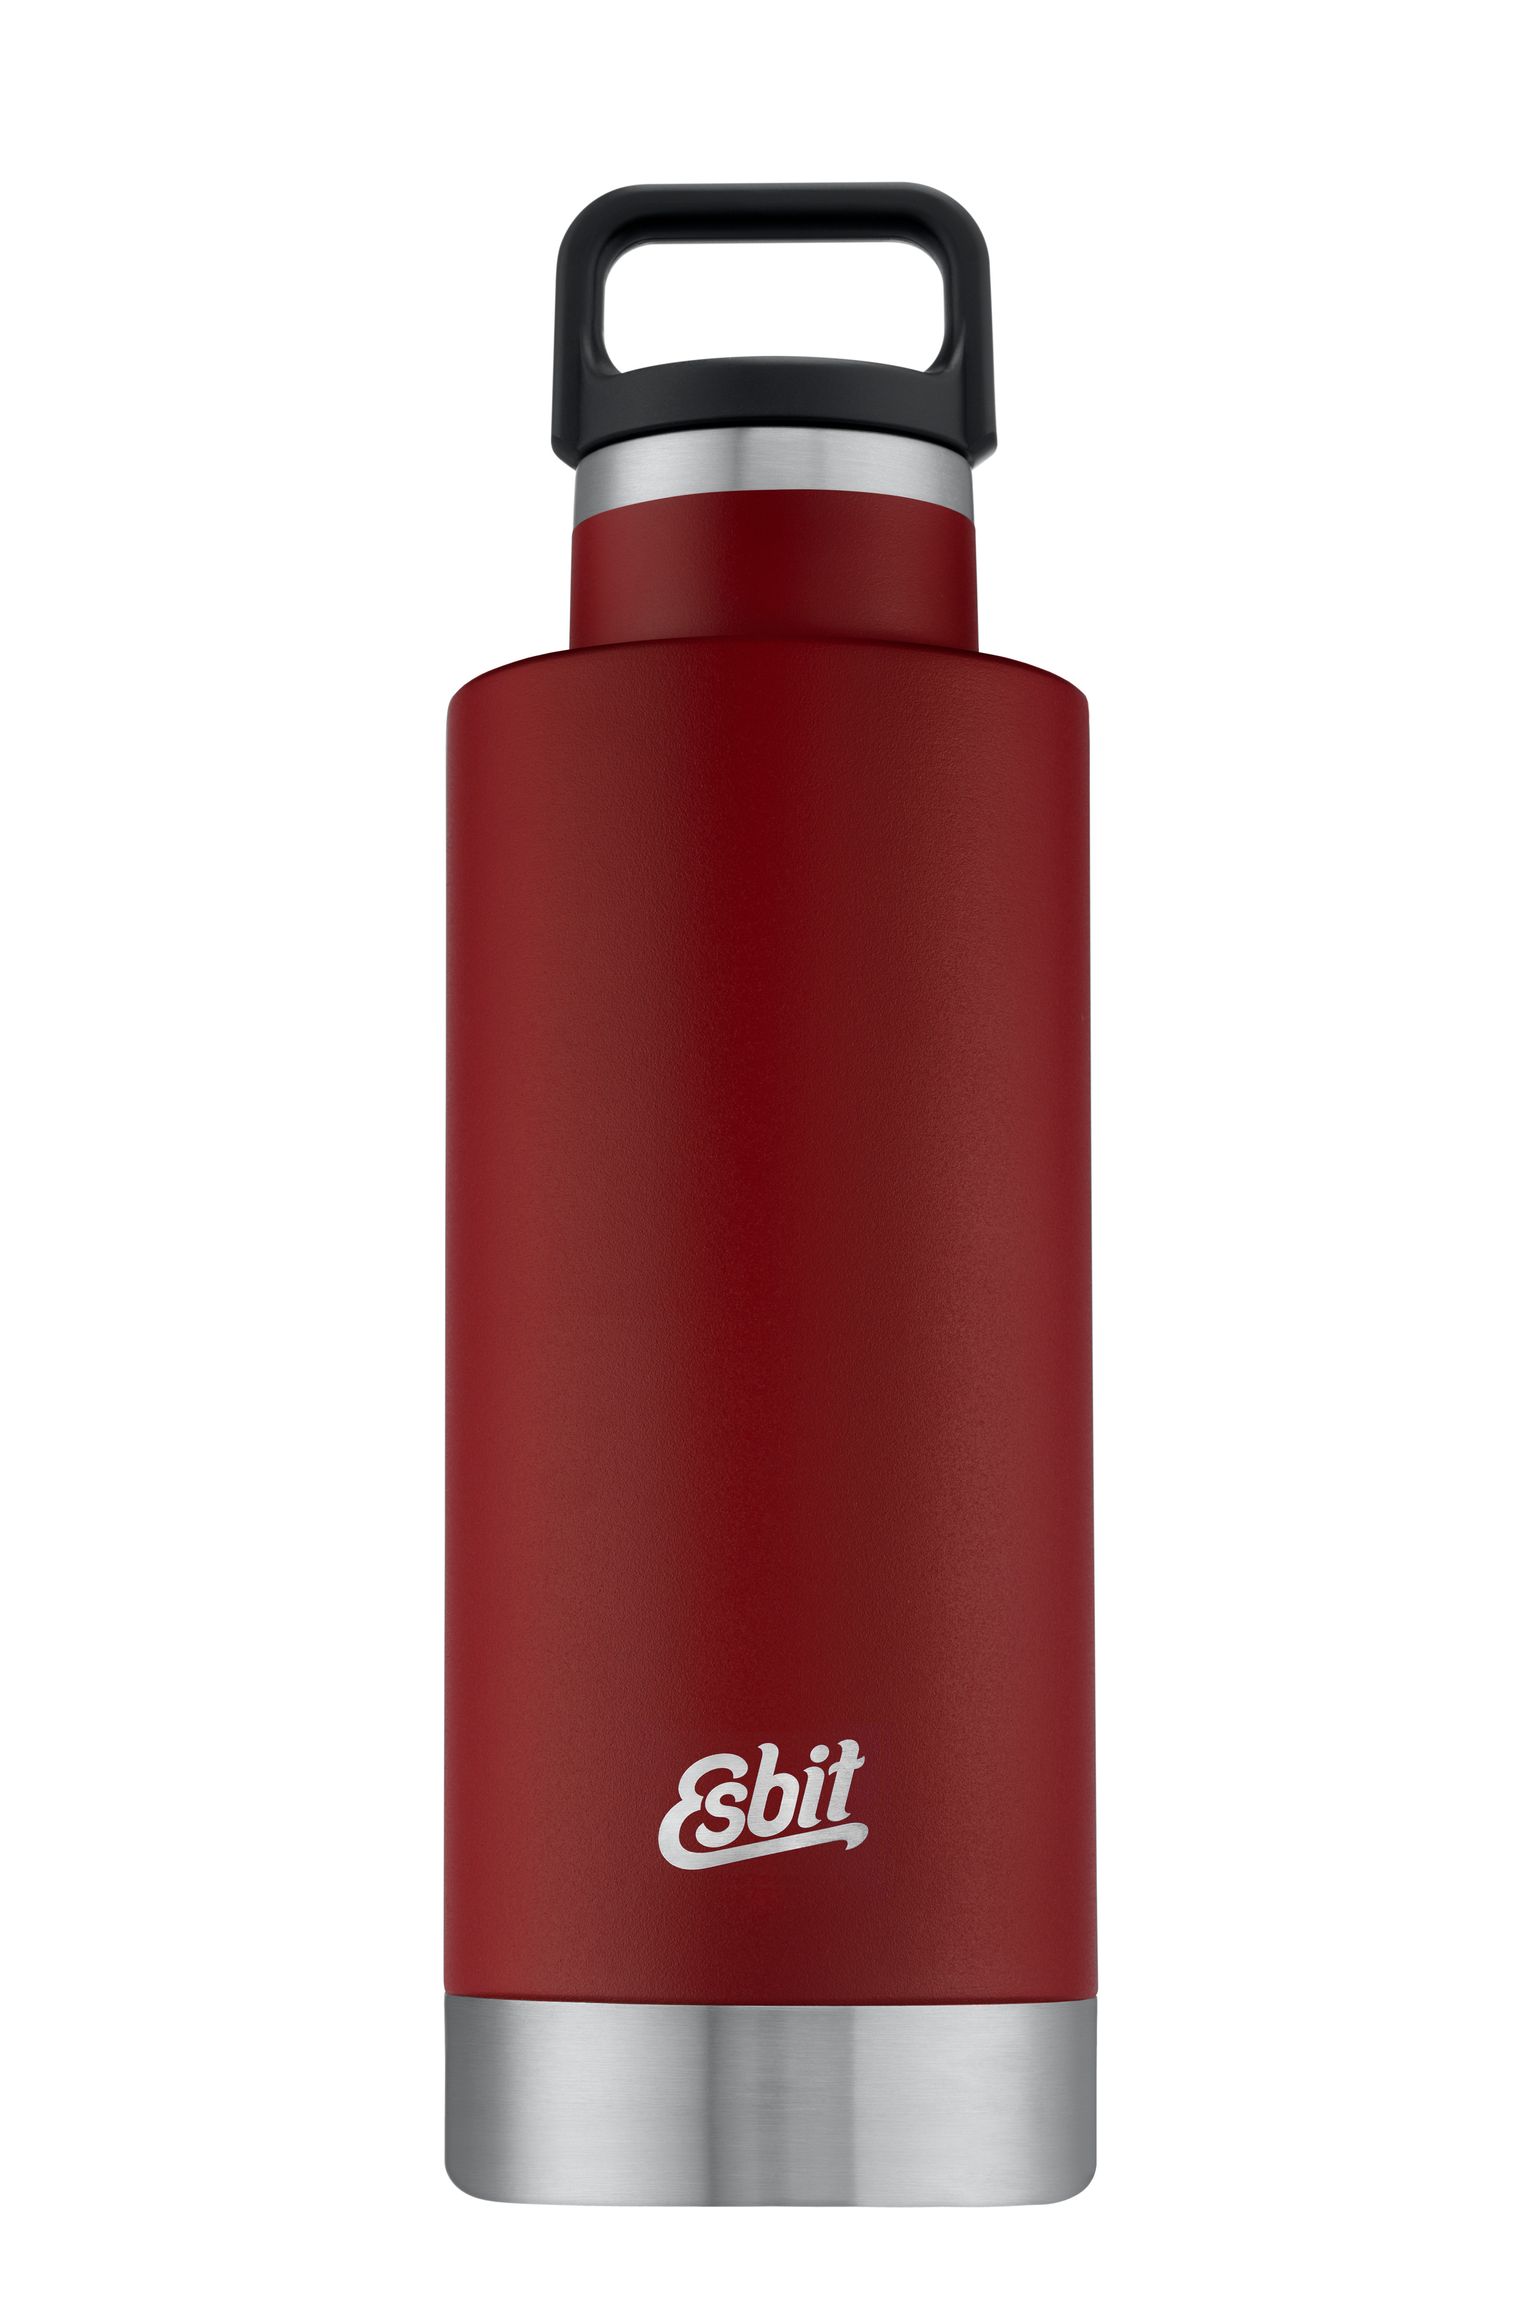 Sculptor Stainless Steel Insulated Bottle Burgundy Red